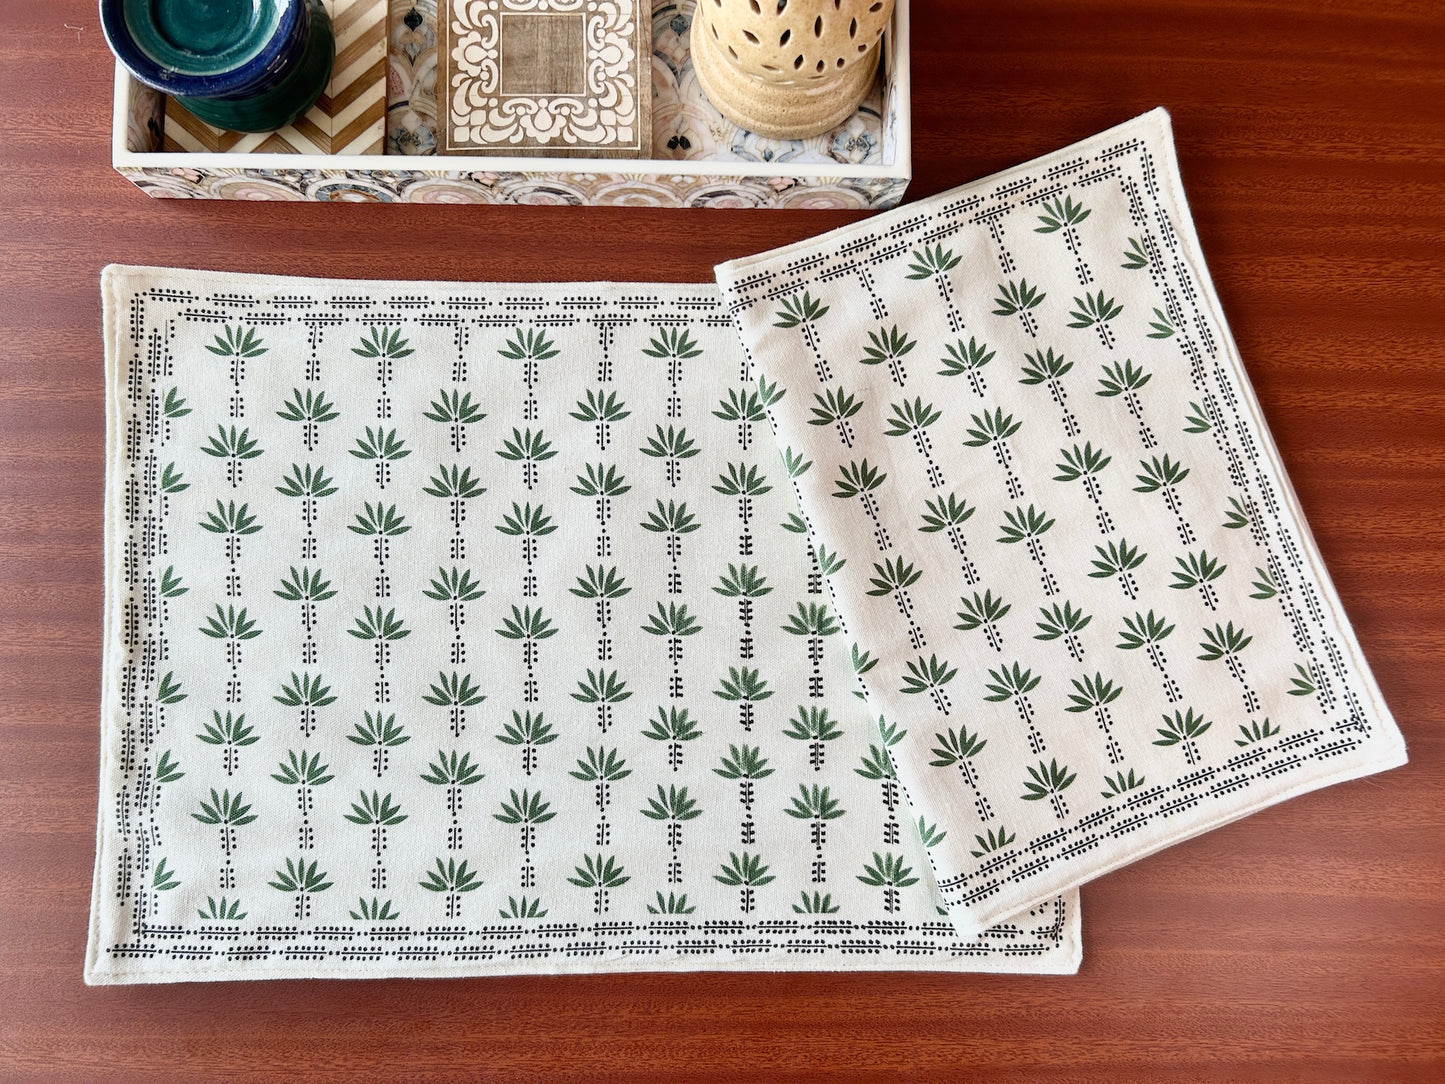 Palm Trees Table Mats 12x18 Inches - Set of 2,4,6